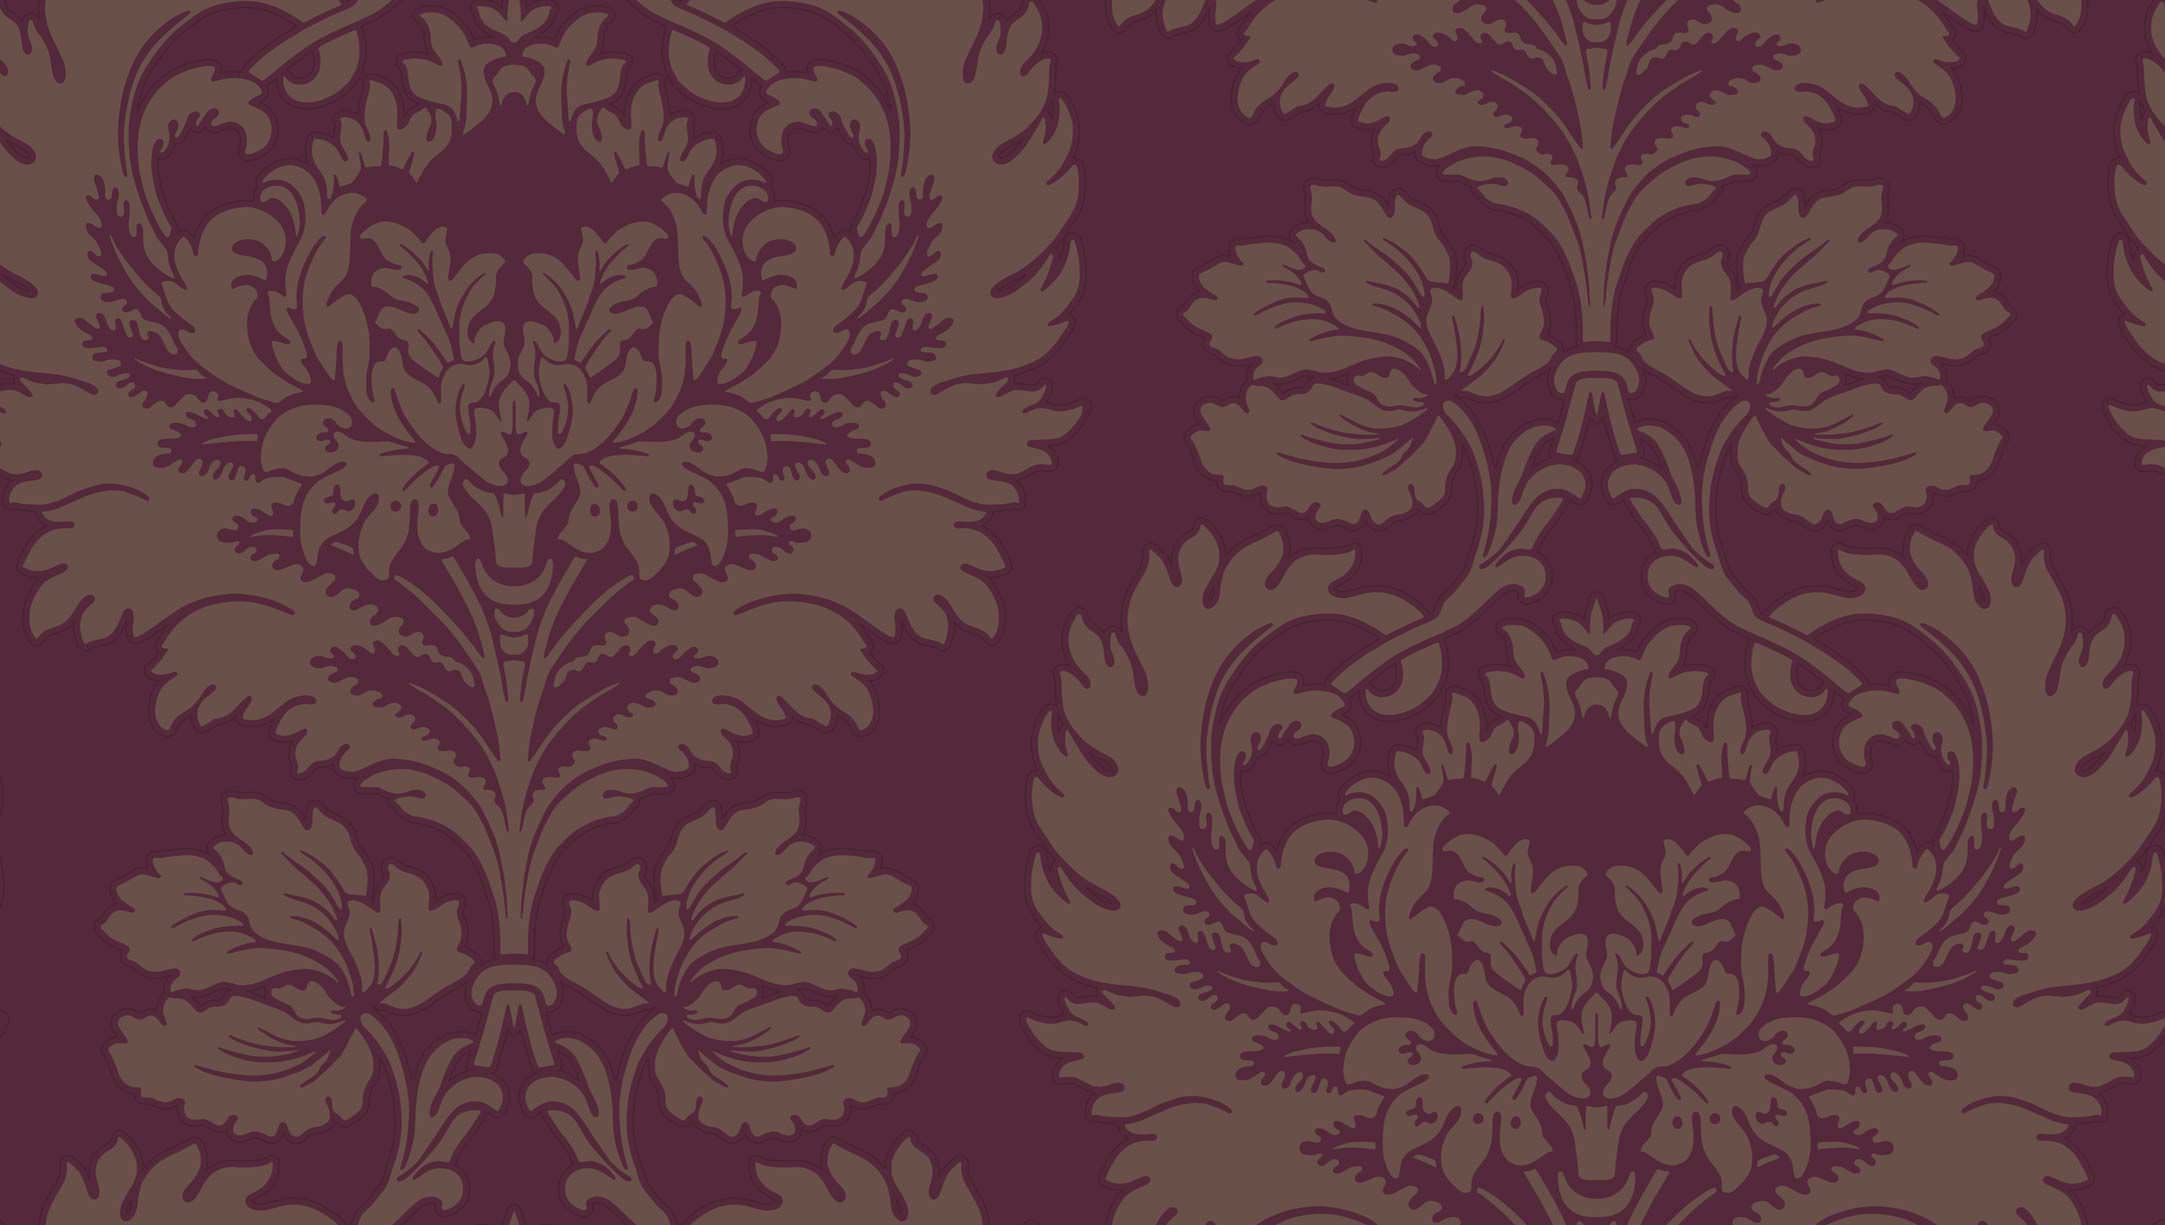 Damask wallpaper / paper / traditional - ARCHIVE TRADITIONAL ...